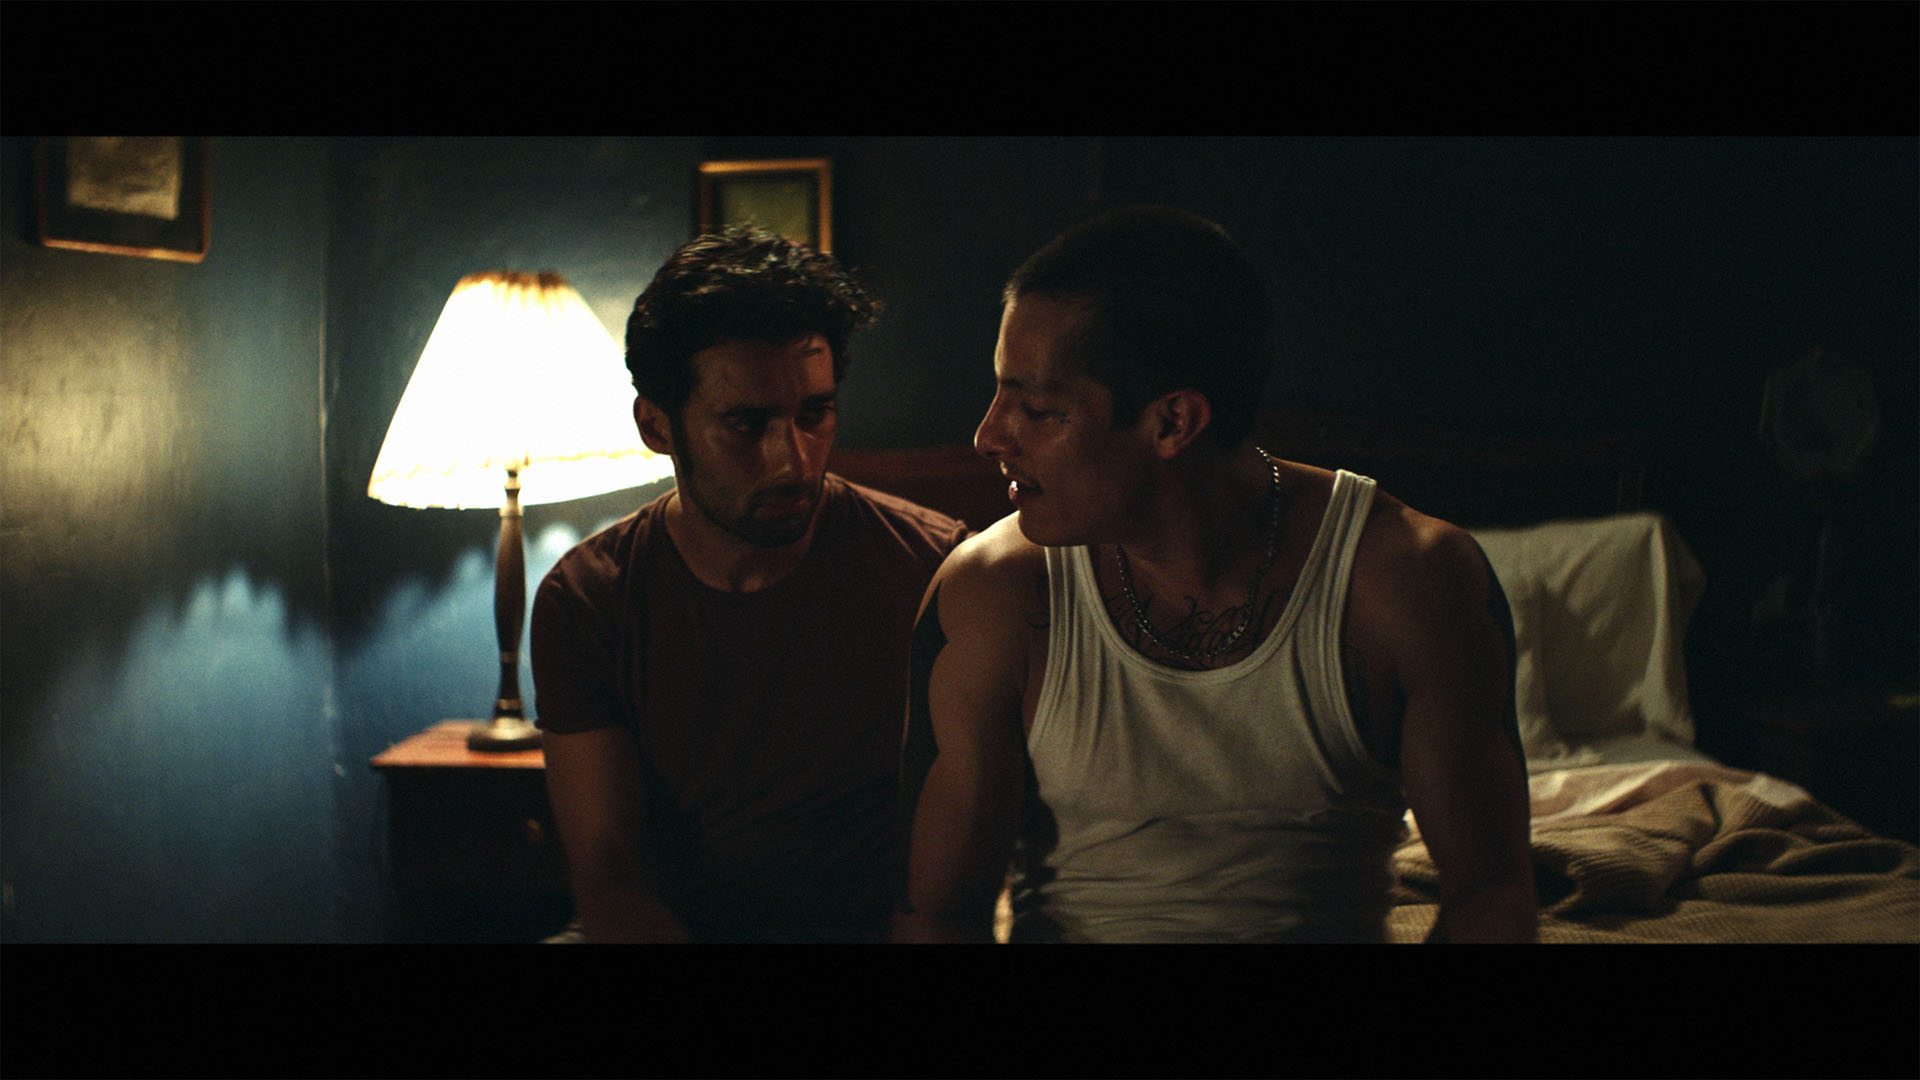 It is a movie about gay experience, it is not about migration, but about di...